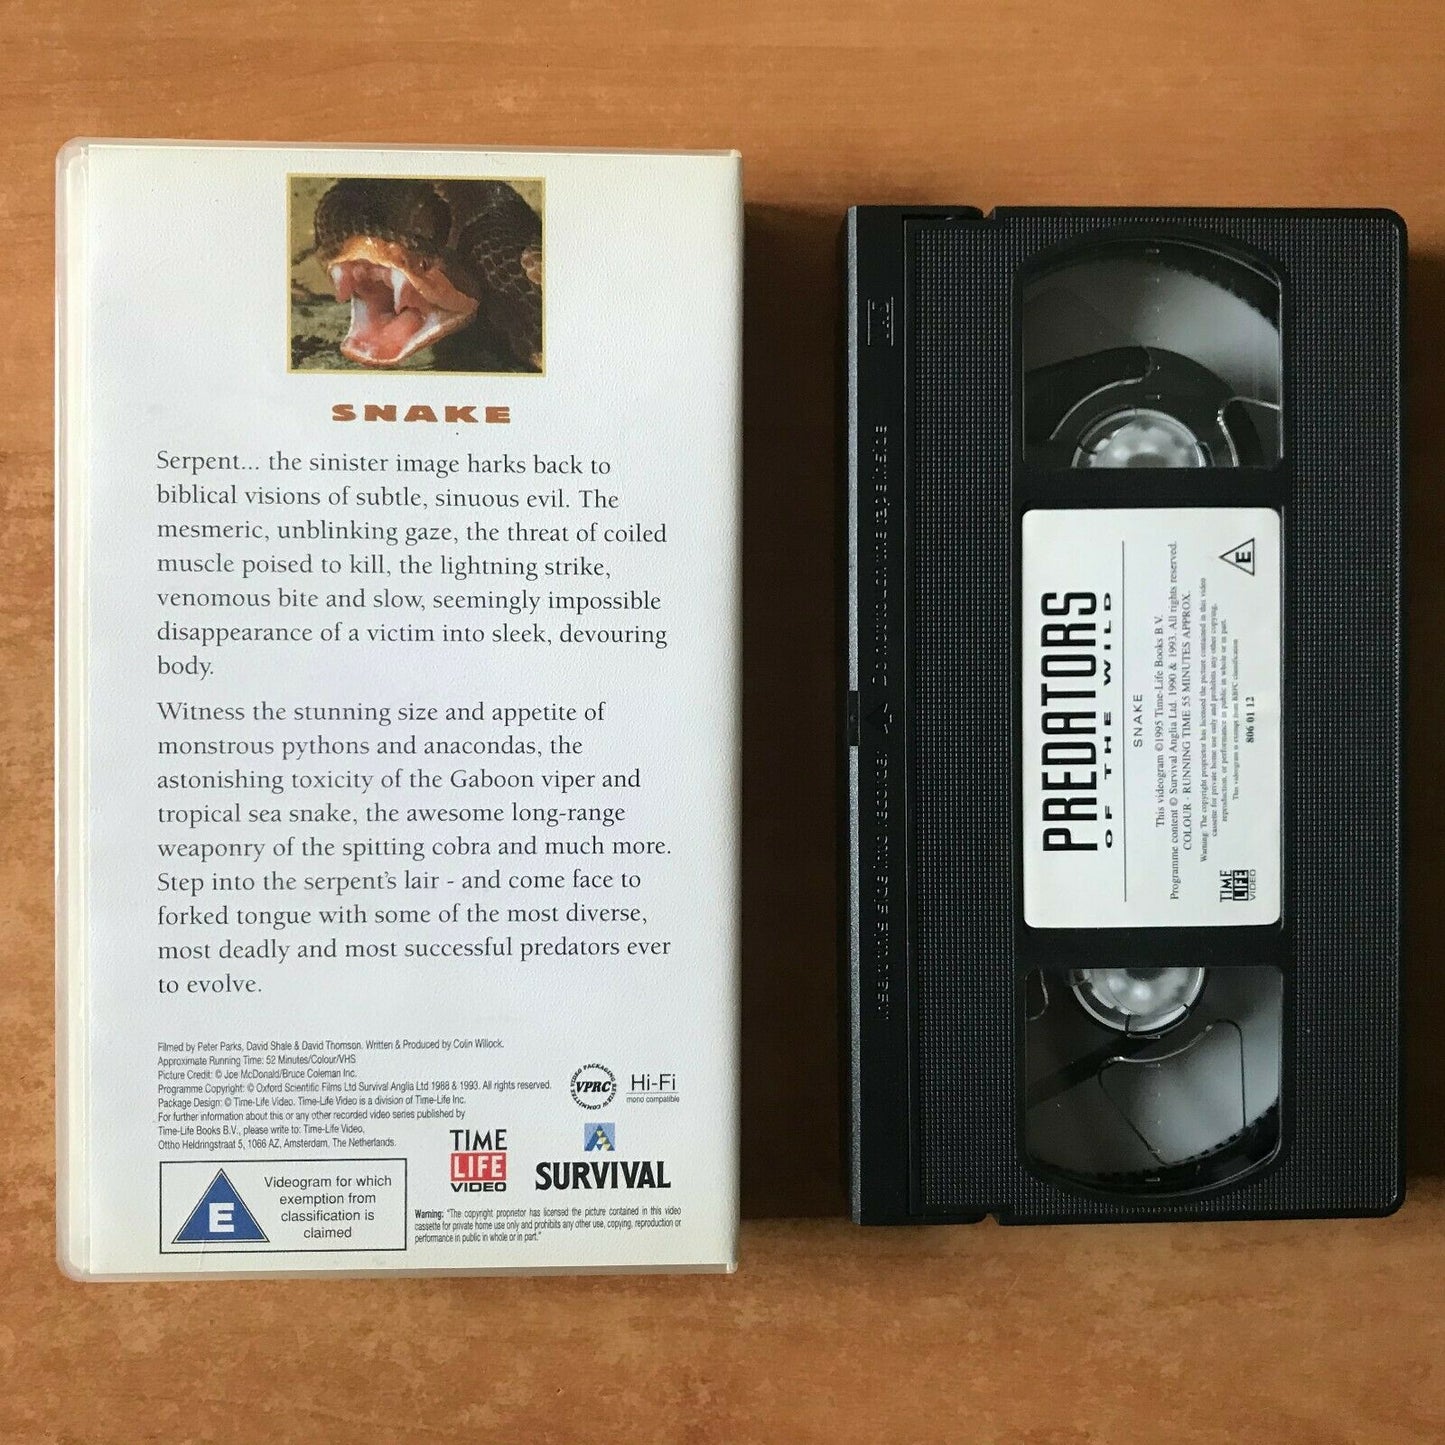 Predators Of The Wild: Snake [Time Life Video] Documentary (Colin Willock) VHS-